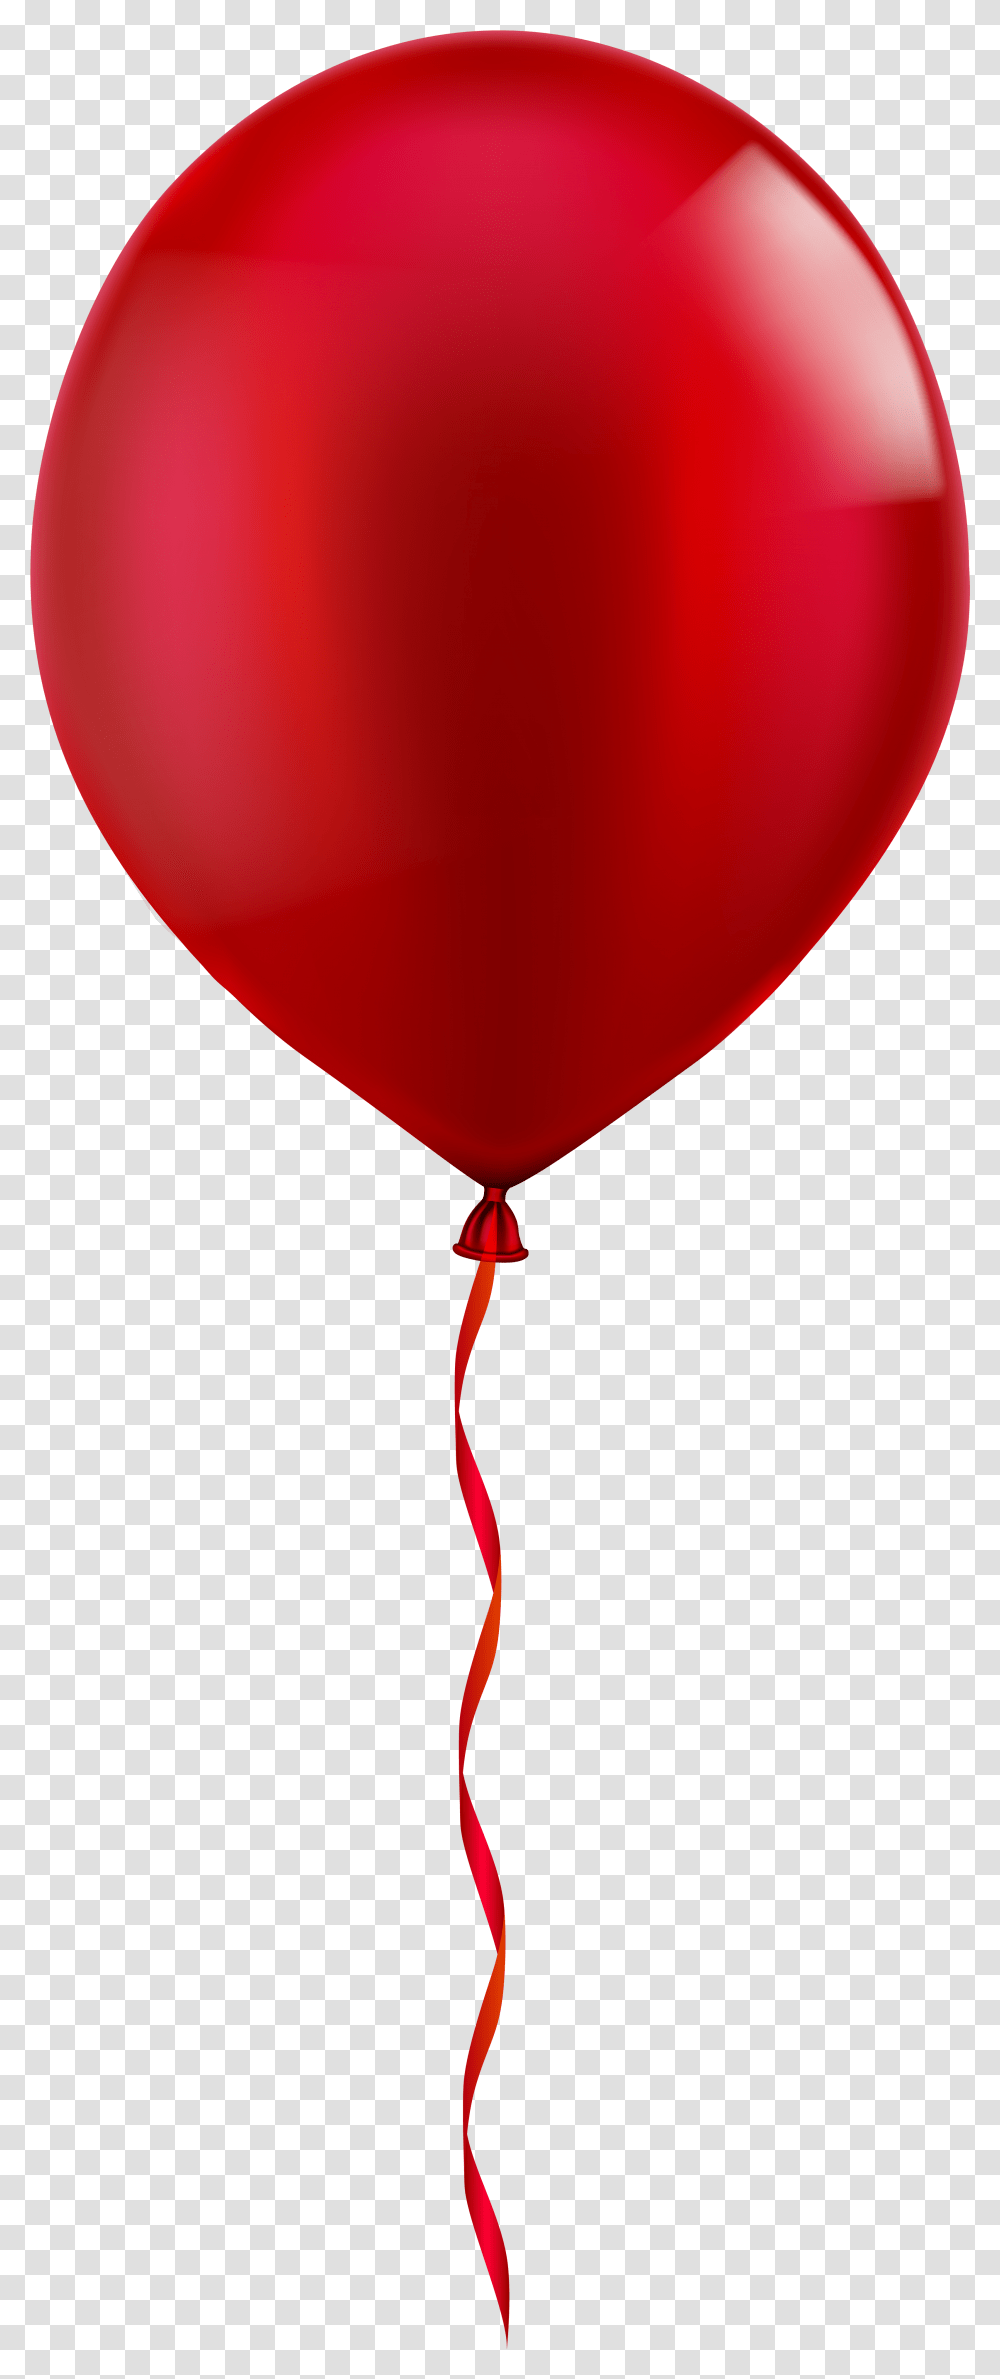 Baloons Red Balloon Clipart Transparent Png